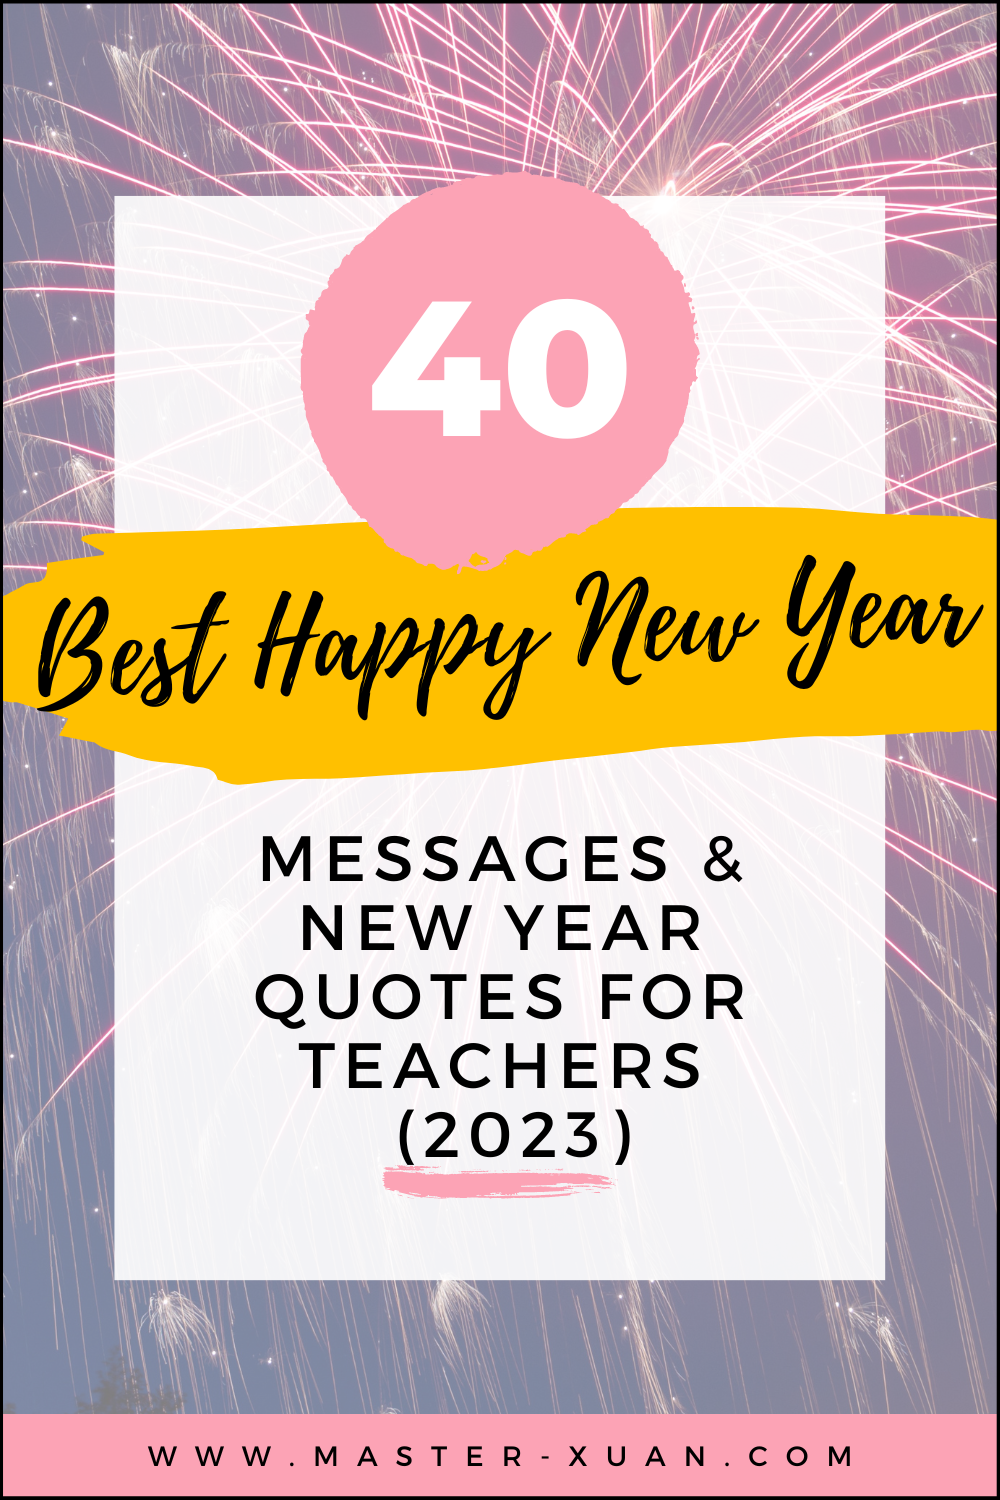 40 best happy new year messages & new year quotes for teachers 2023